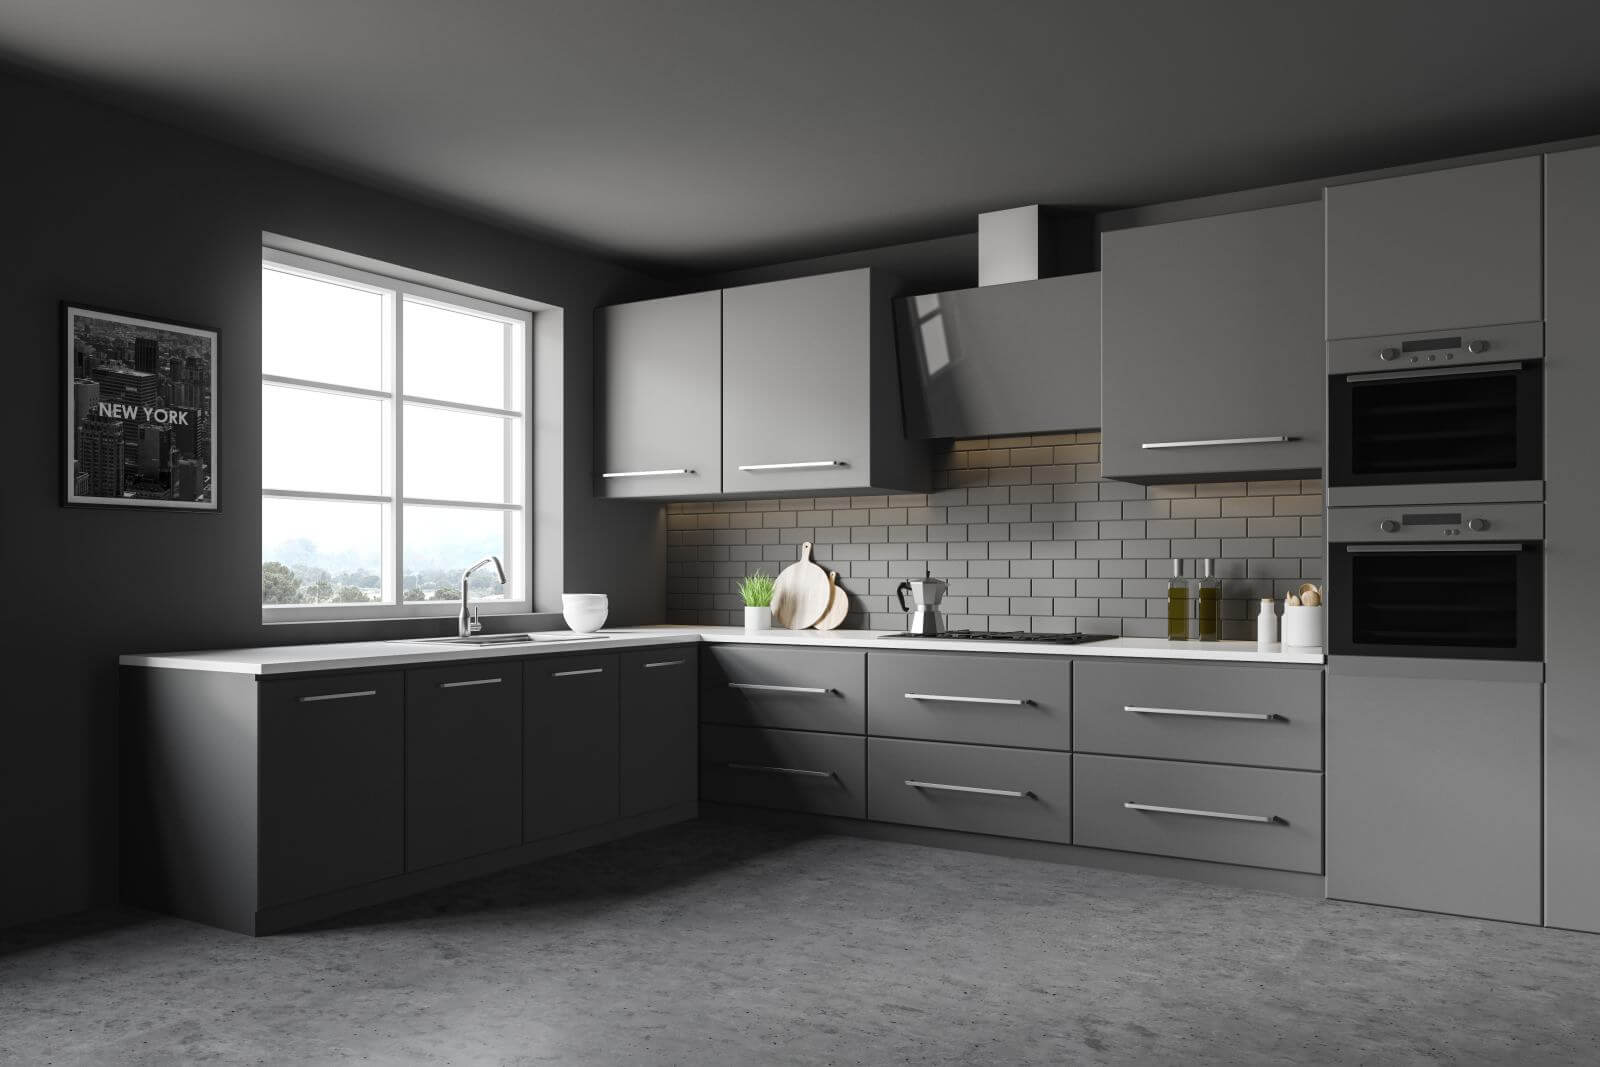 Corner of stylish kitchen with dark grey and brick walls, concrete floor, gray countertops with built in sink and cooker, cupboards and picture with New York cityscape. 3d rendering